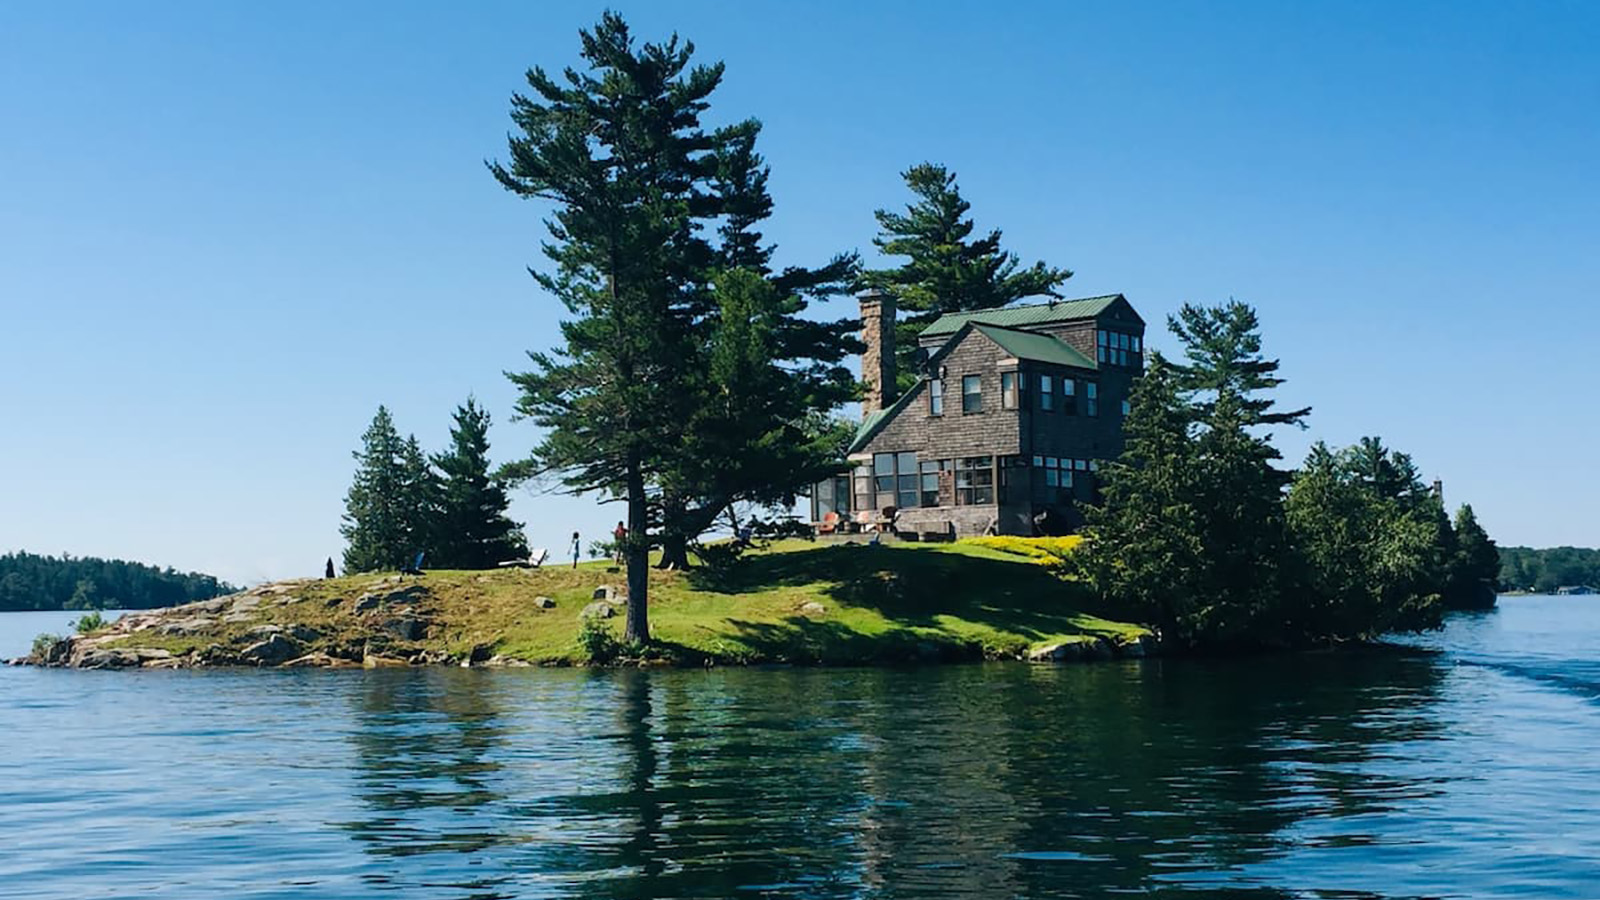 The home on Little Chimney Island